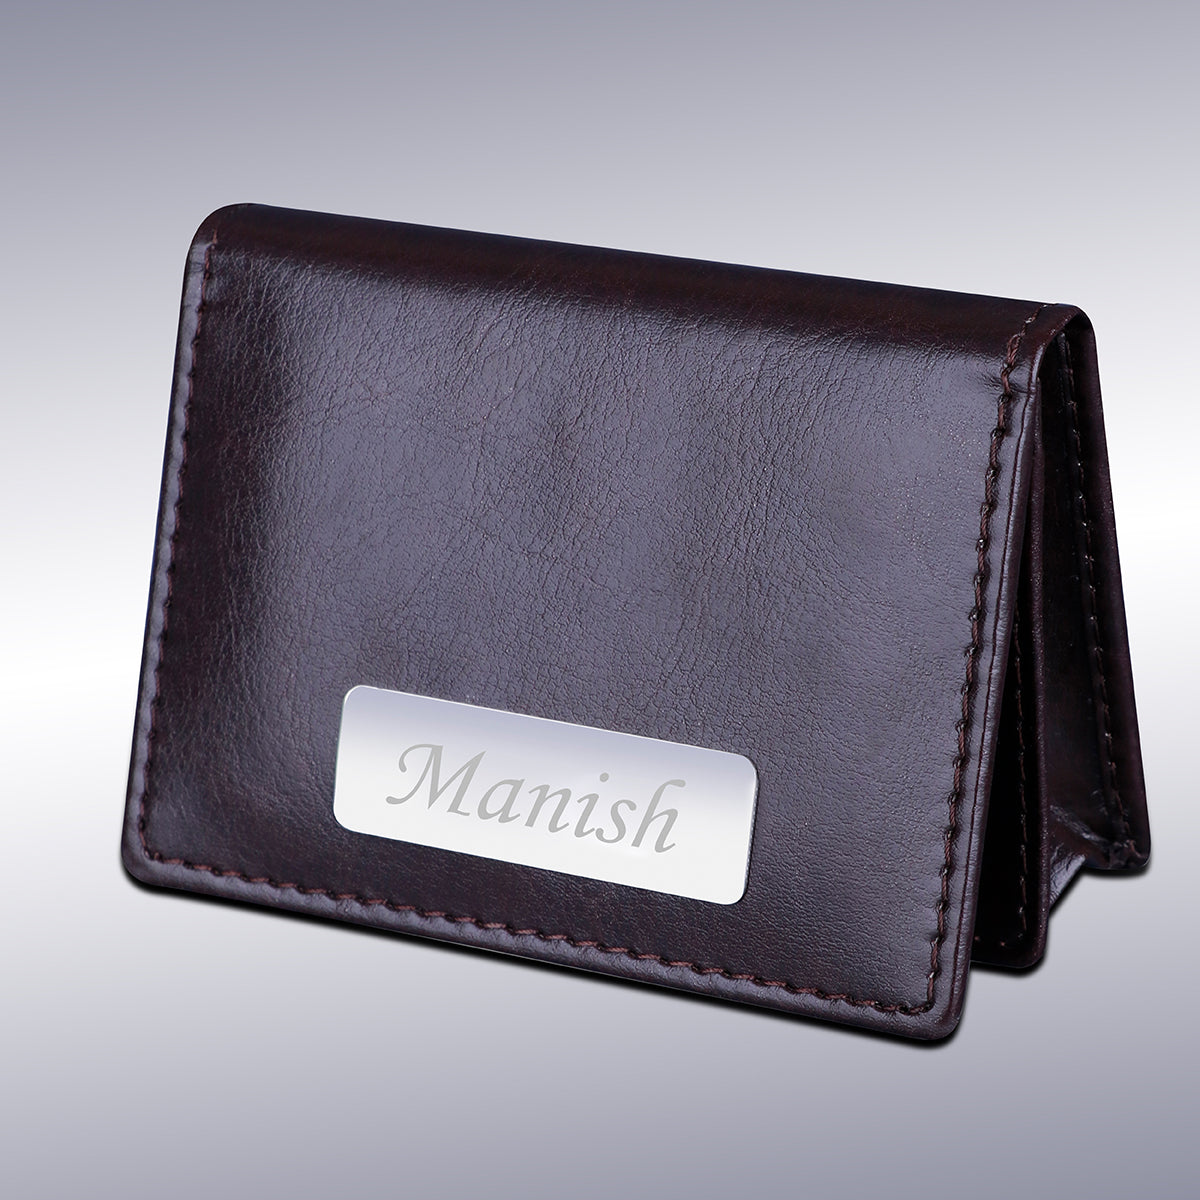 Personalized Premium Leather Cardholder With Name